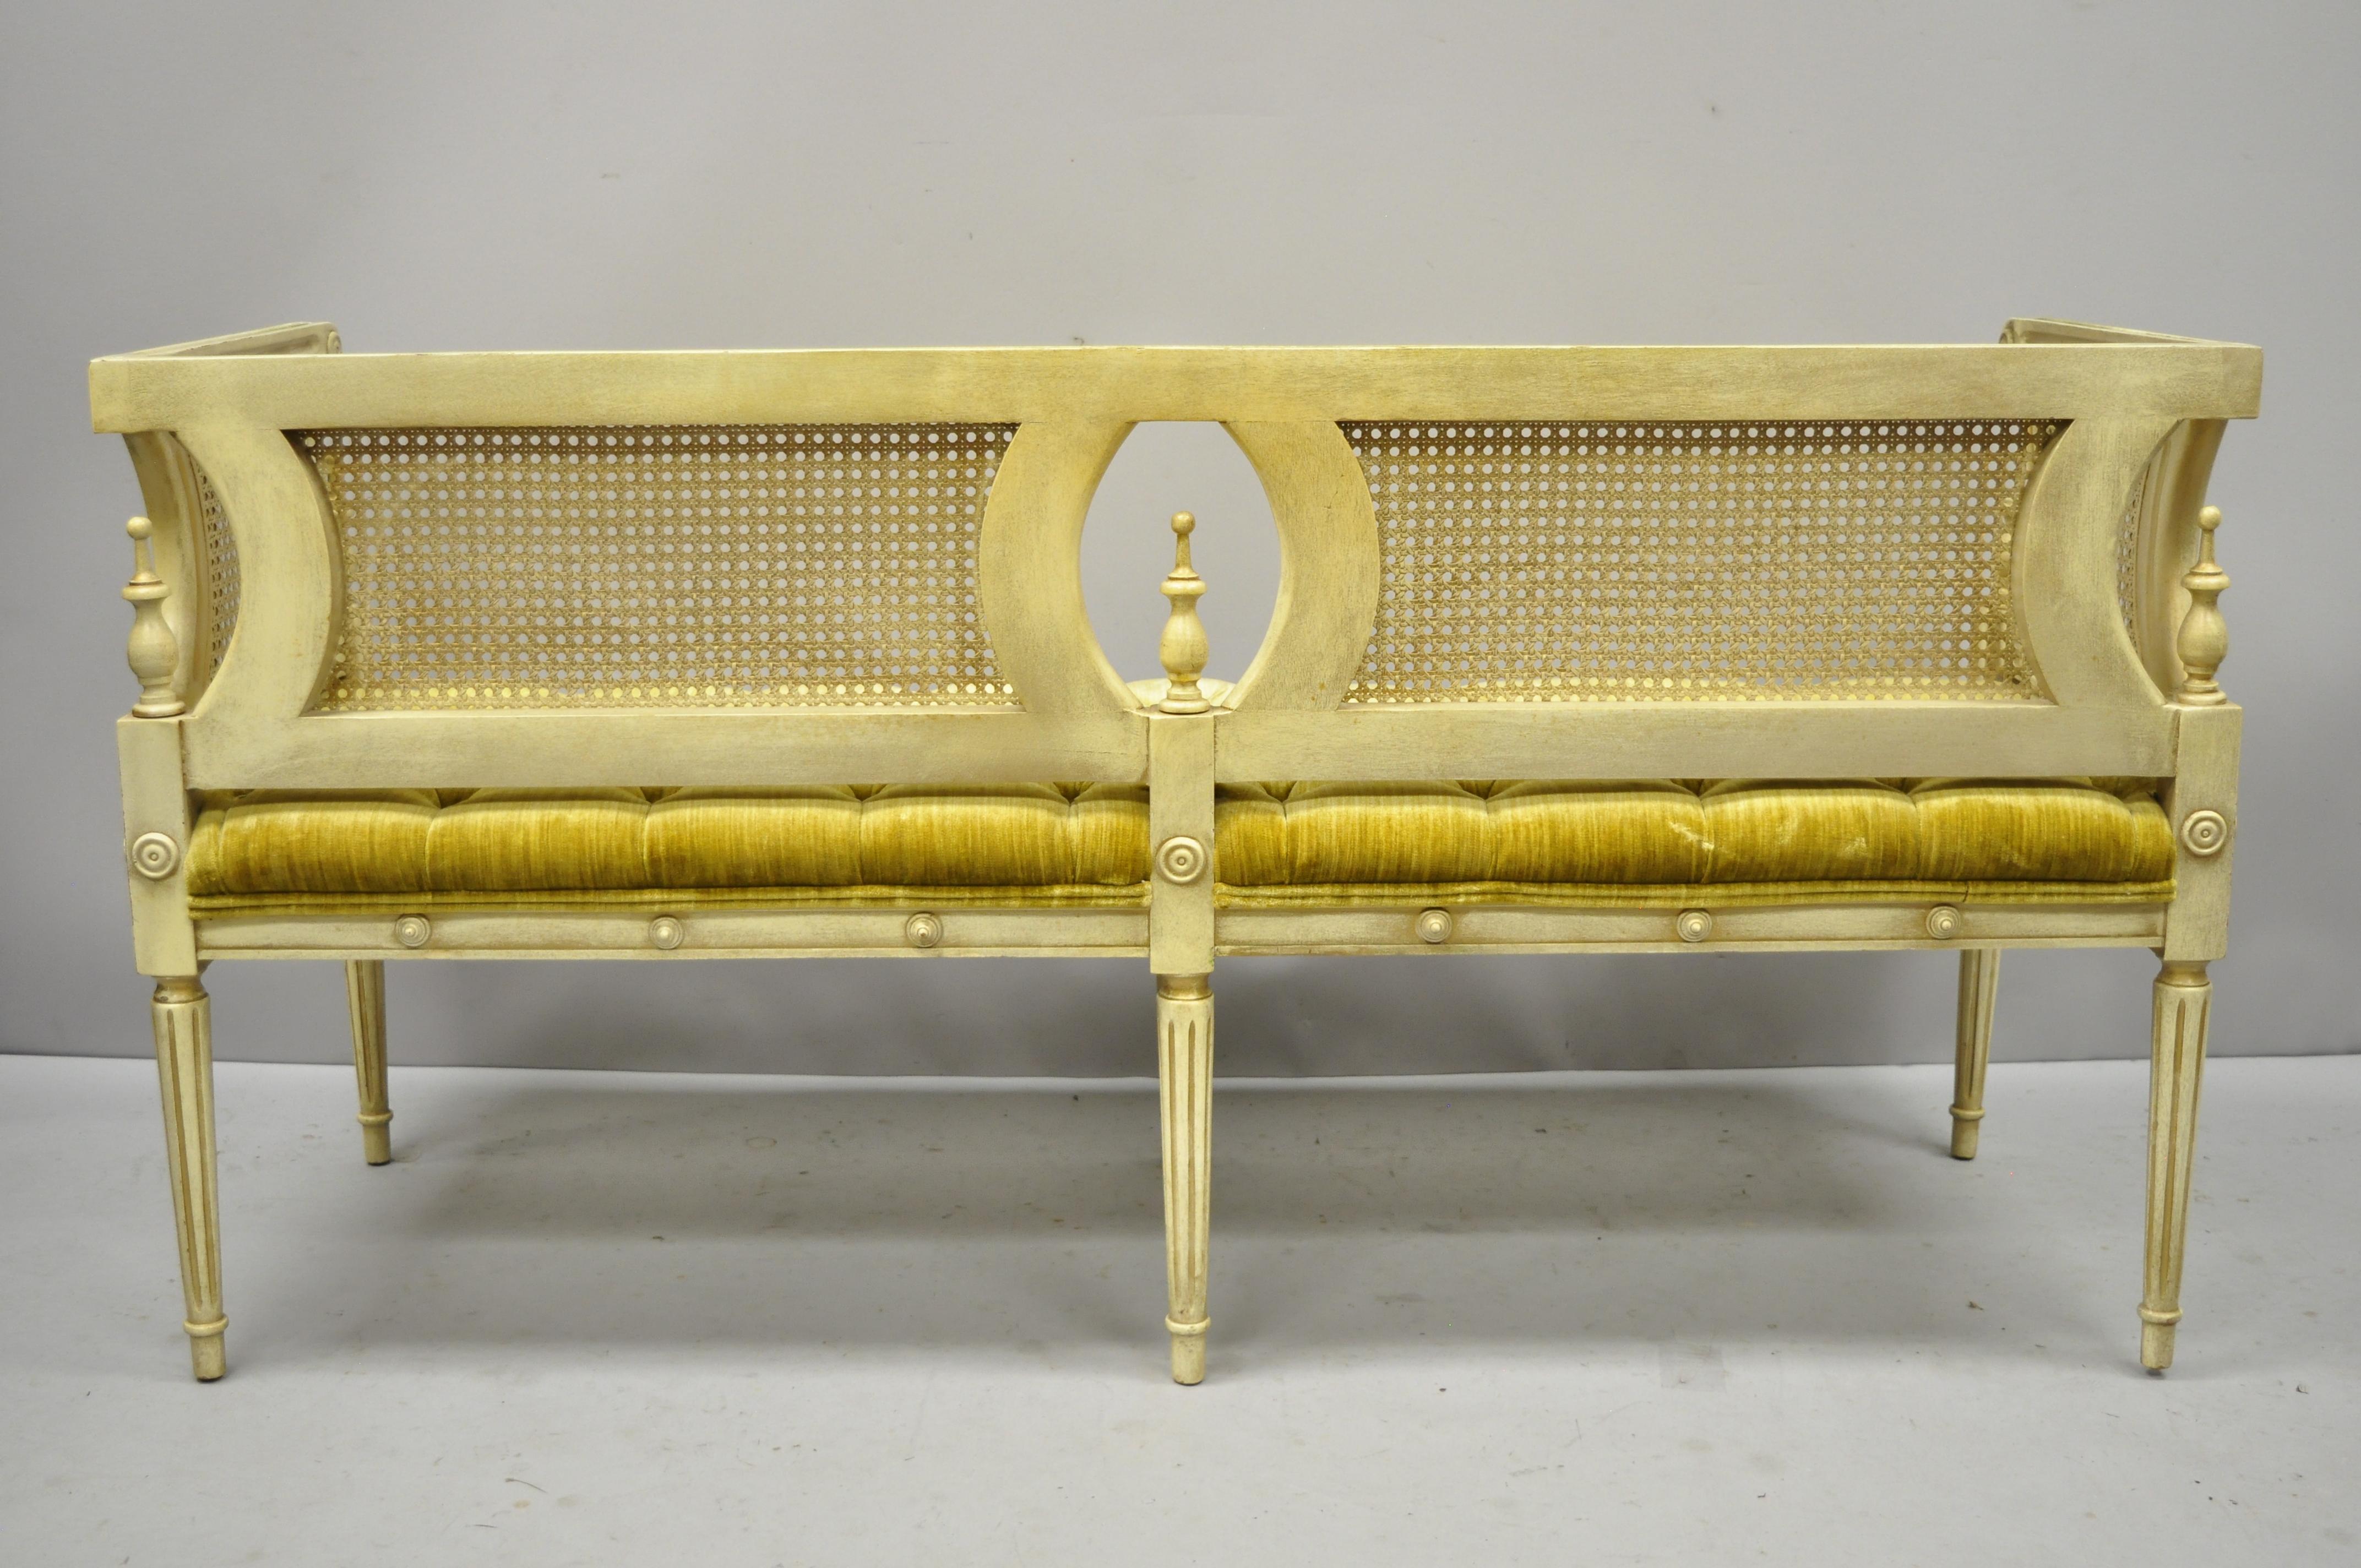 Vintage French Provincial Louis XVI Style Cane Back Cream and Gold Bench Settee 1